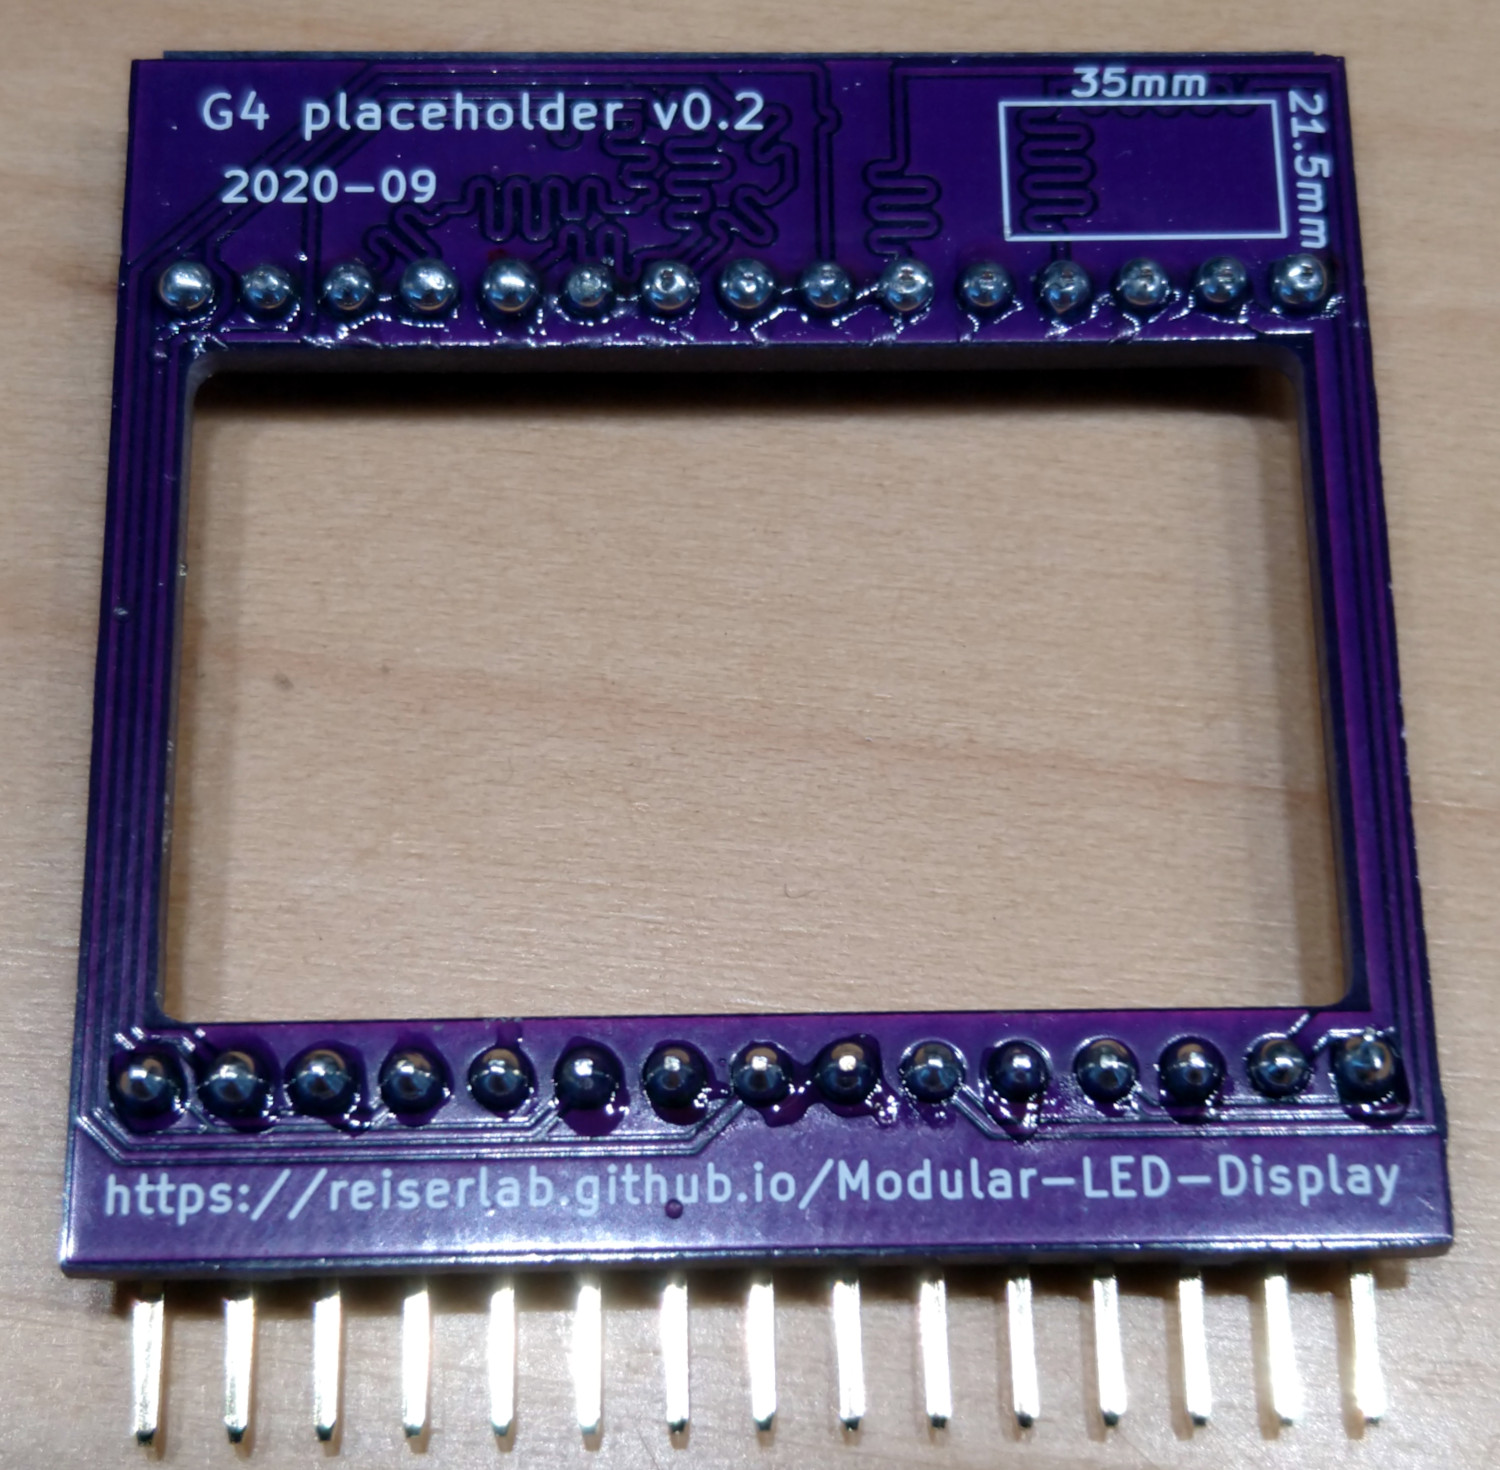 The assembled window PCB (as "placeholder v0.2")